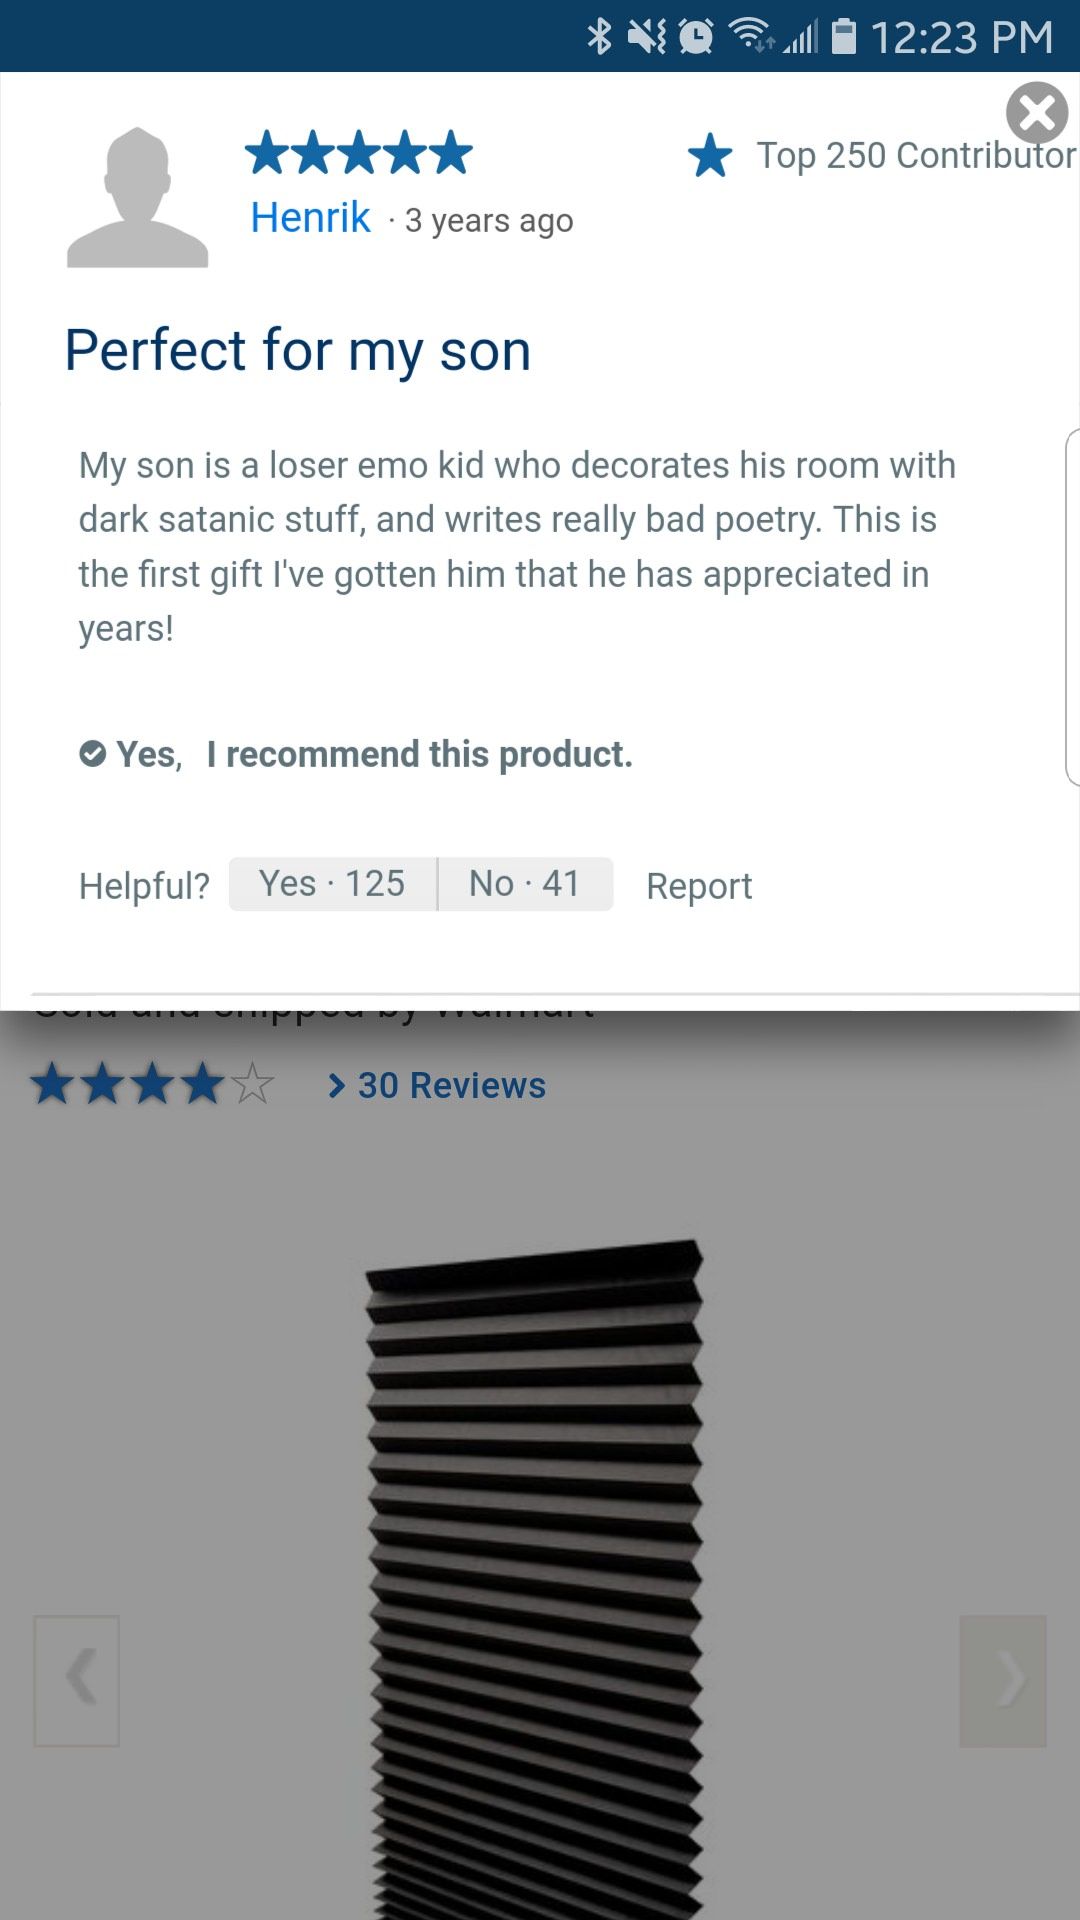 The most helpful review for a black out shade at Wal-Mart